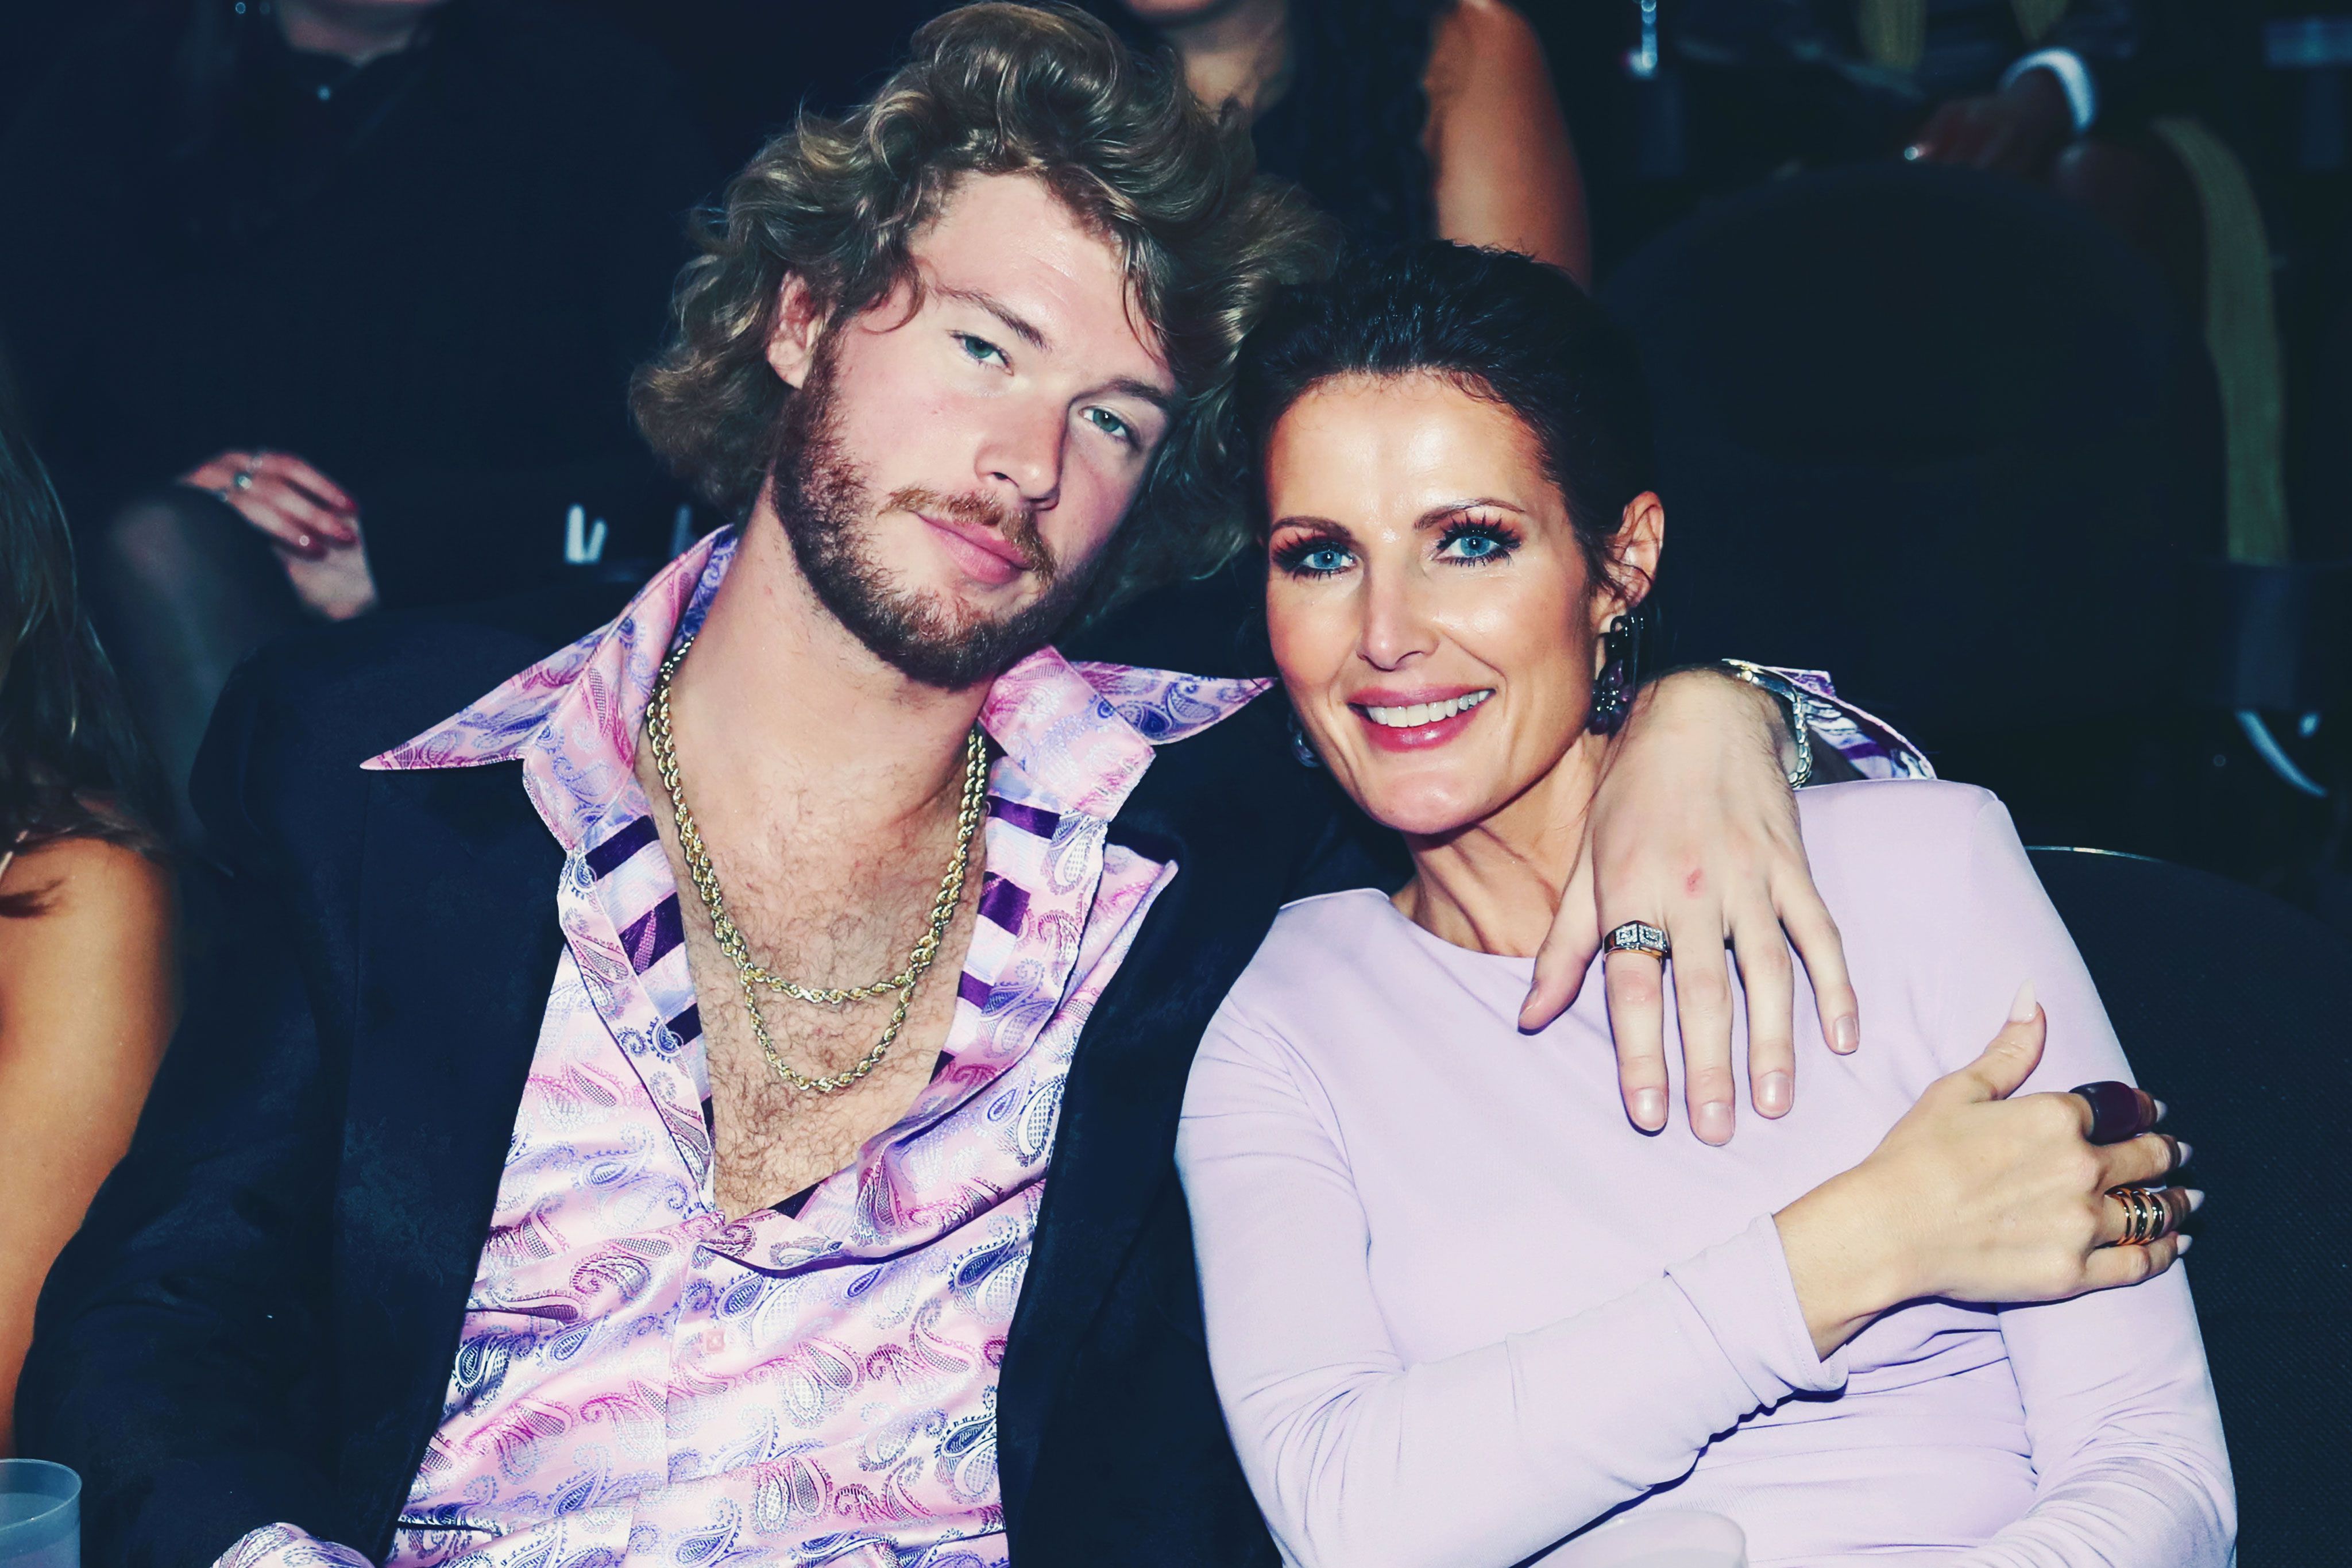 Mom Forced Pain Ful Sex - Yung Gravy took Addison Rae's Mom to the VMAs